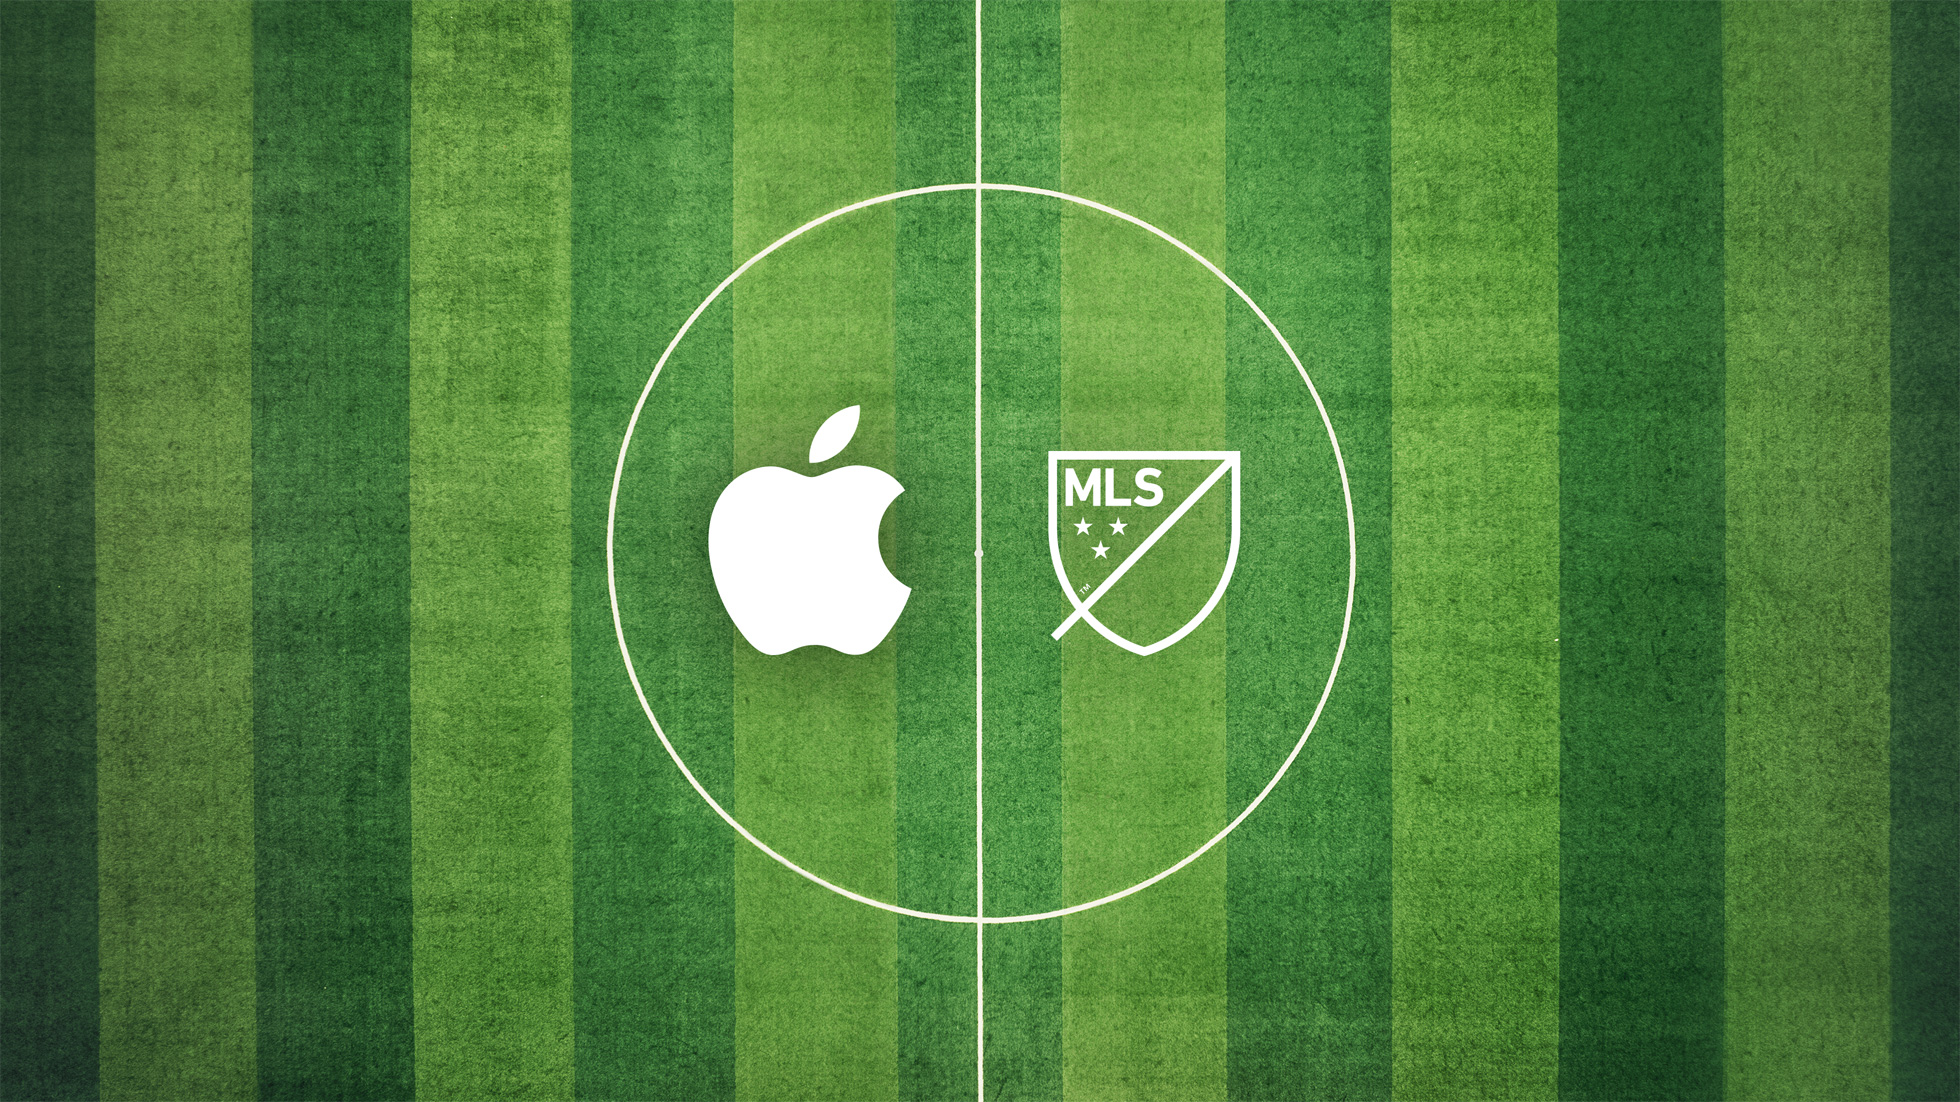 Apple TV Plus scores another huge sports deal with MLS soccer